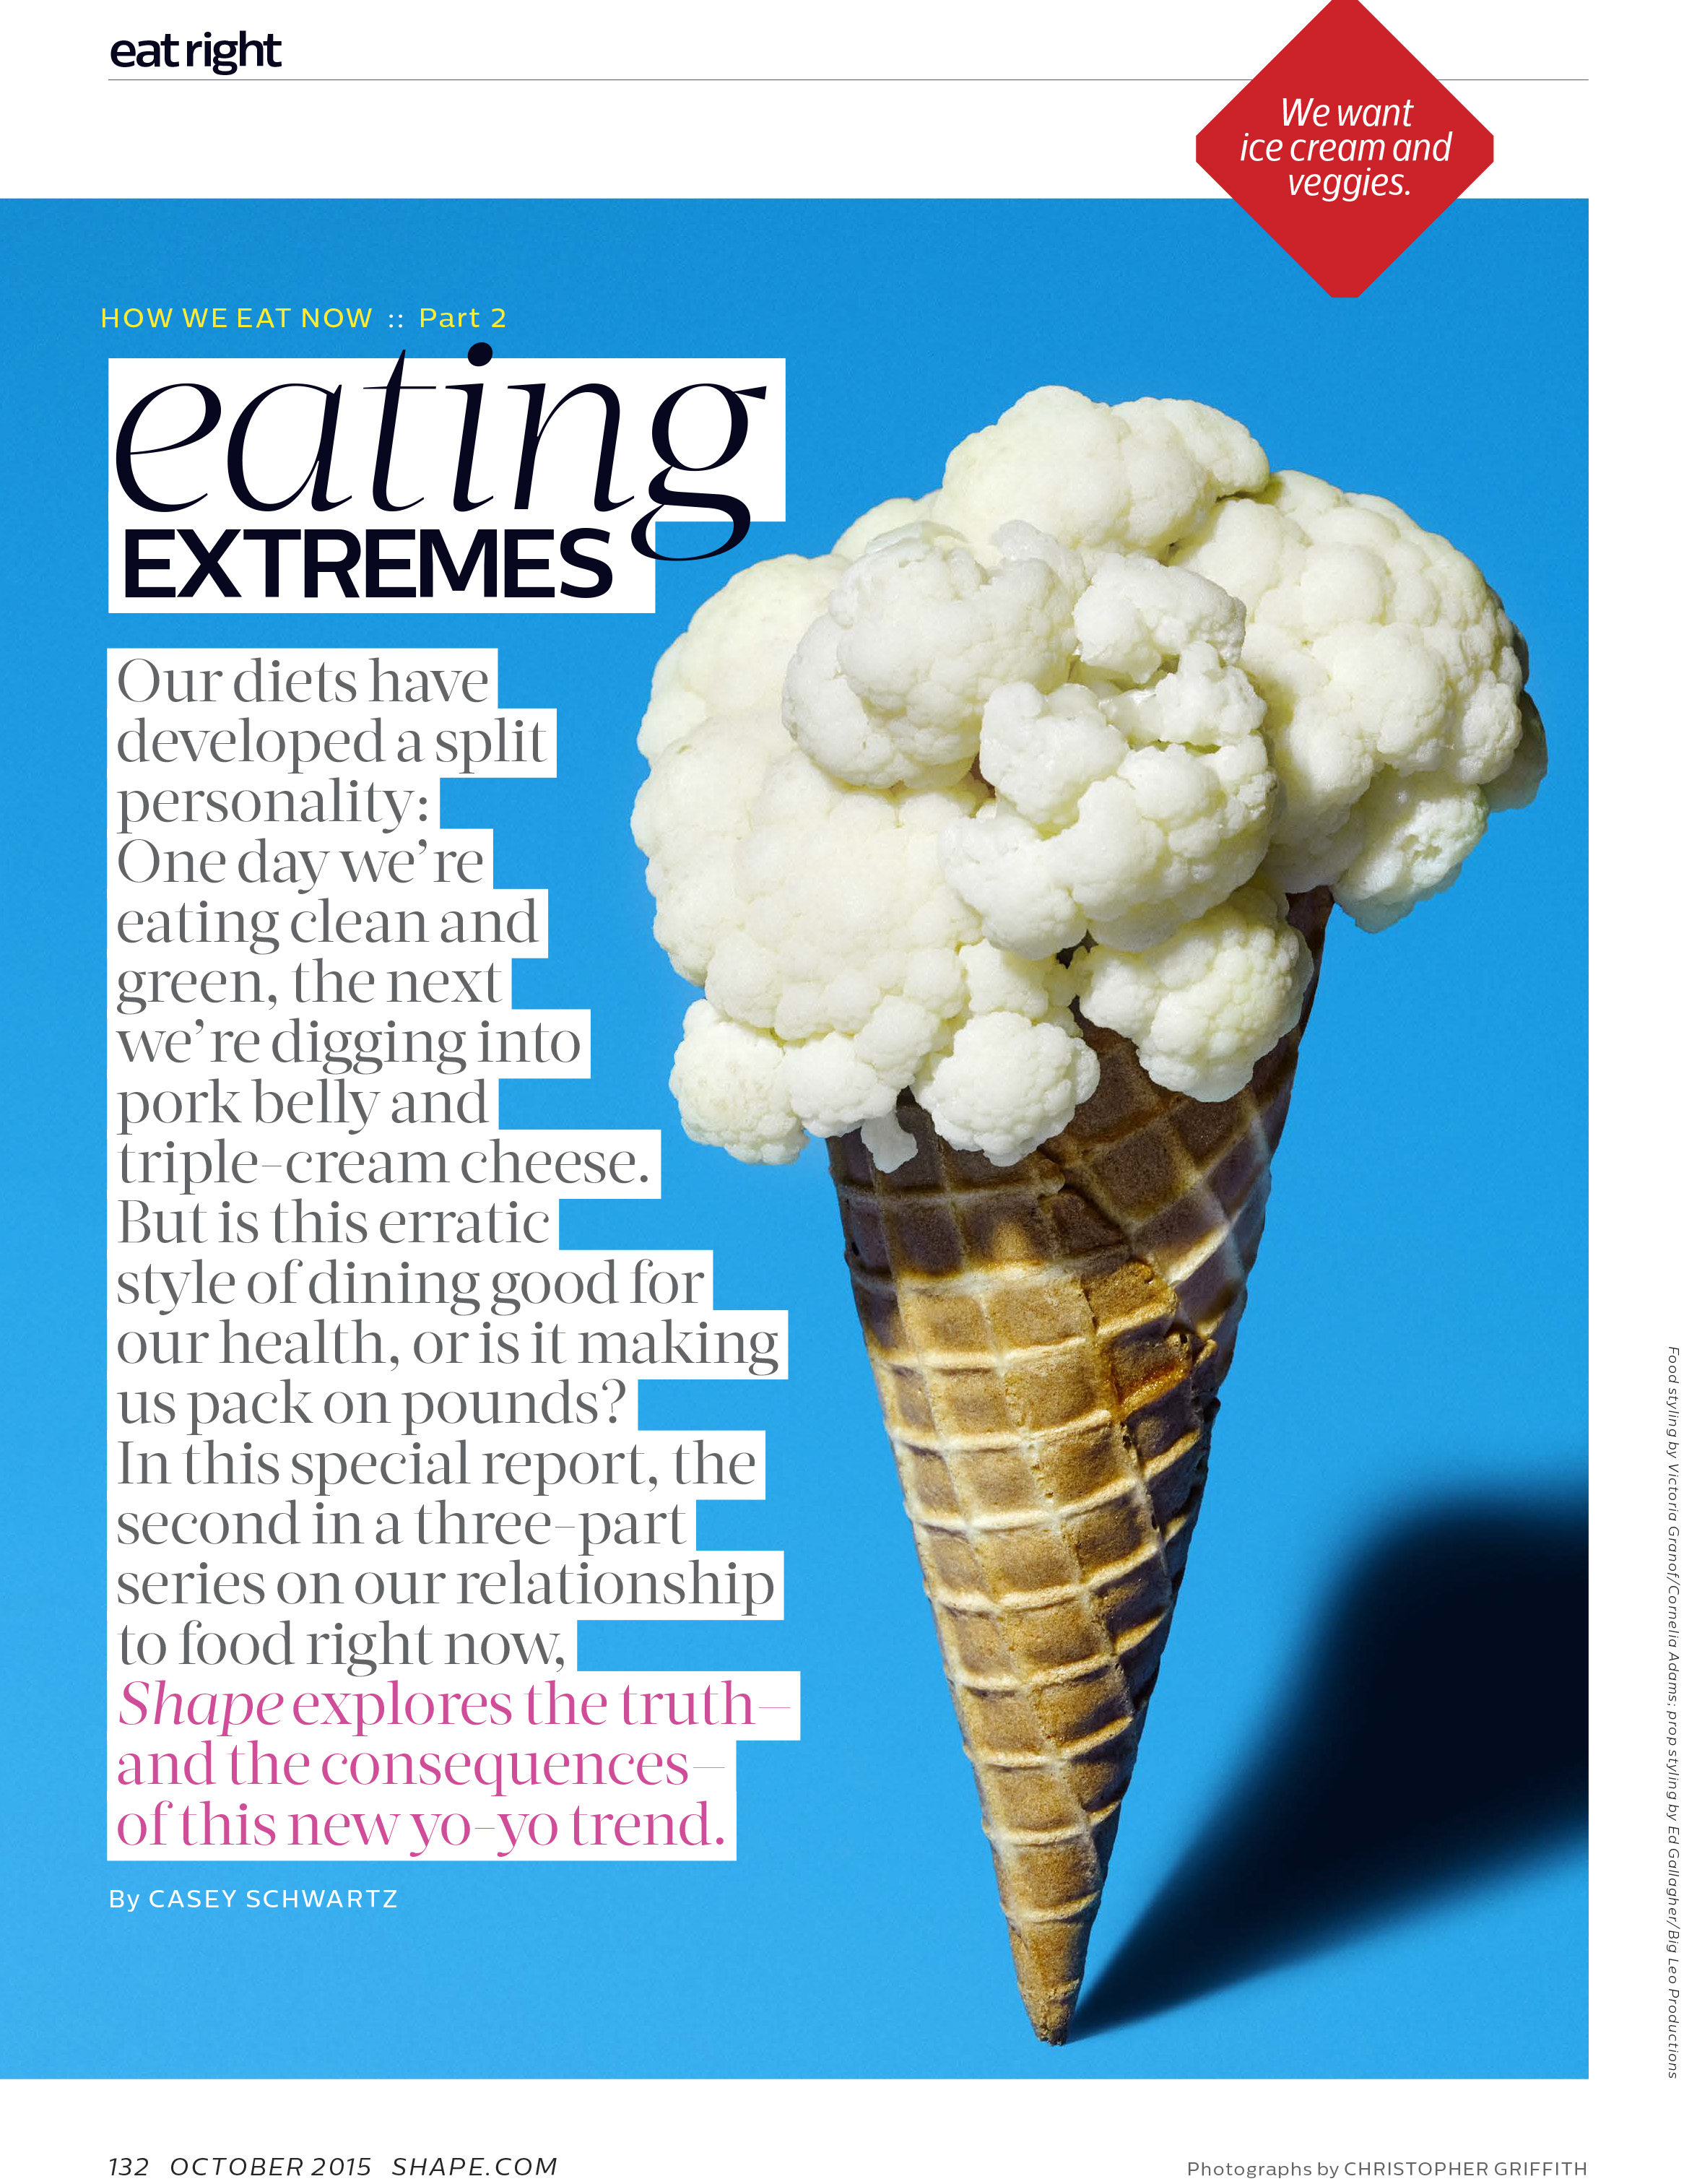 Eating Extremes, October 2015